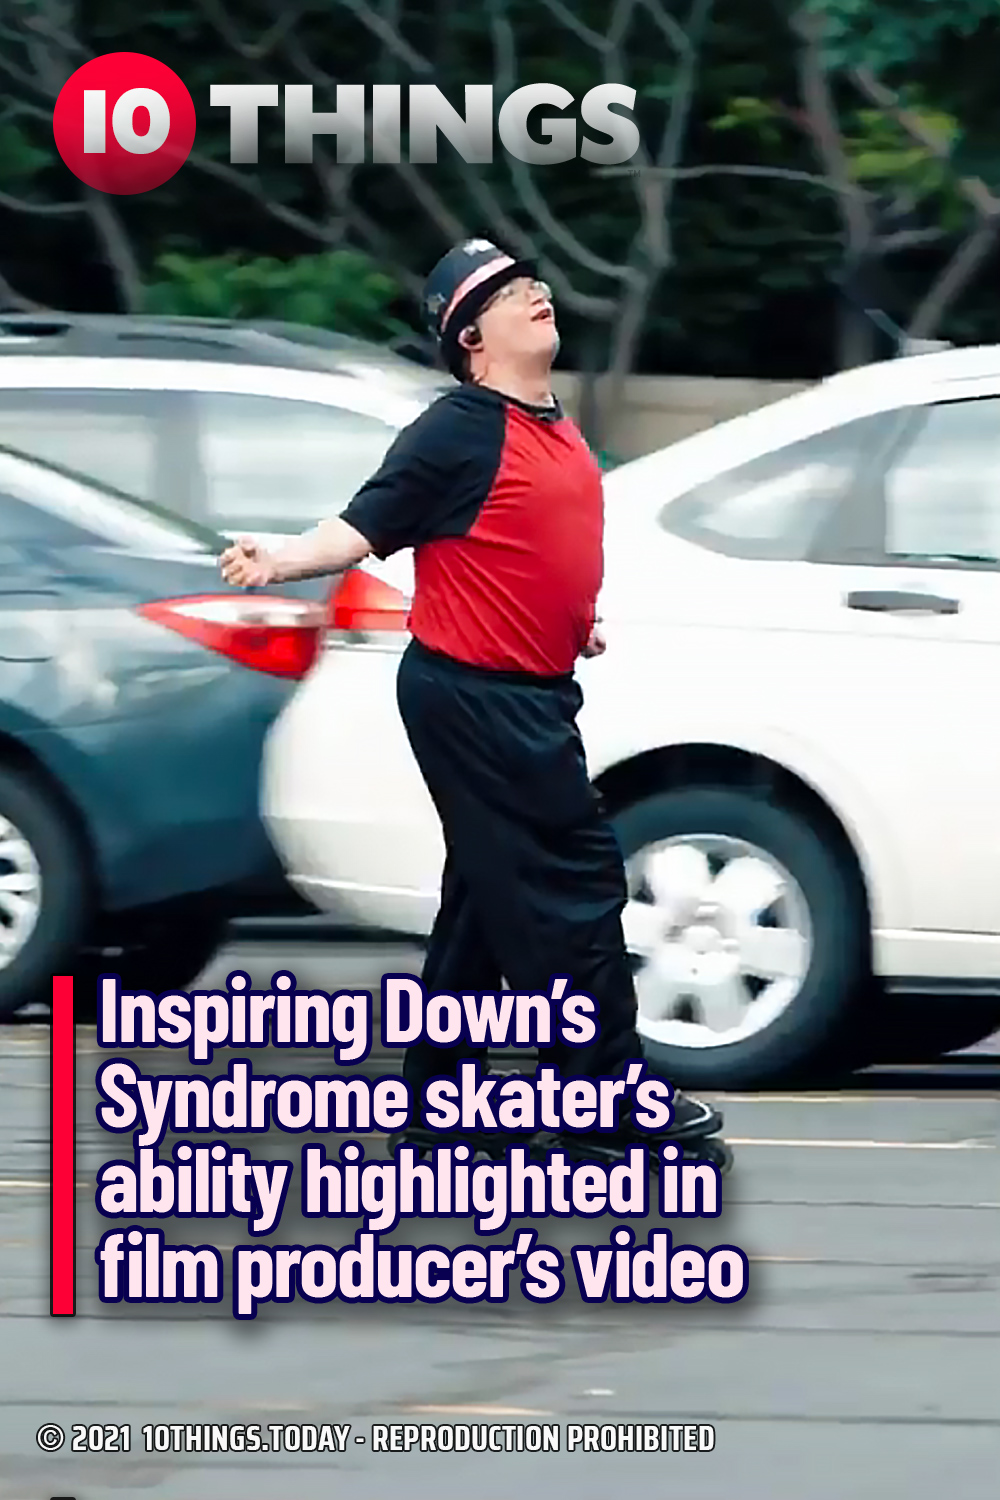 Inspiring Down’s Syndrome skater’s ability highlighted in film producer’s video